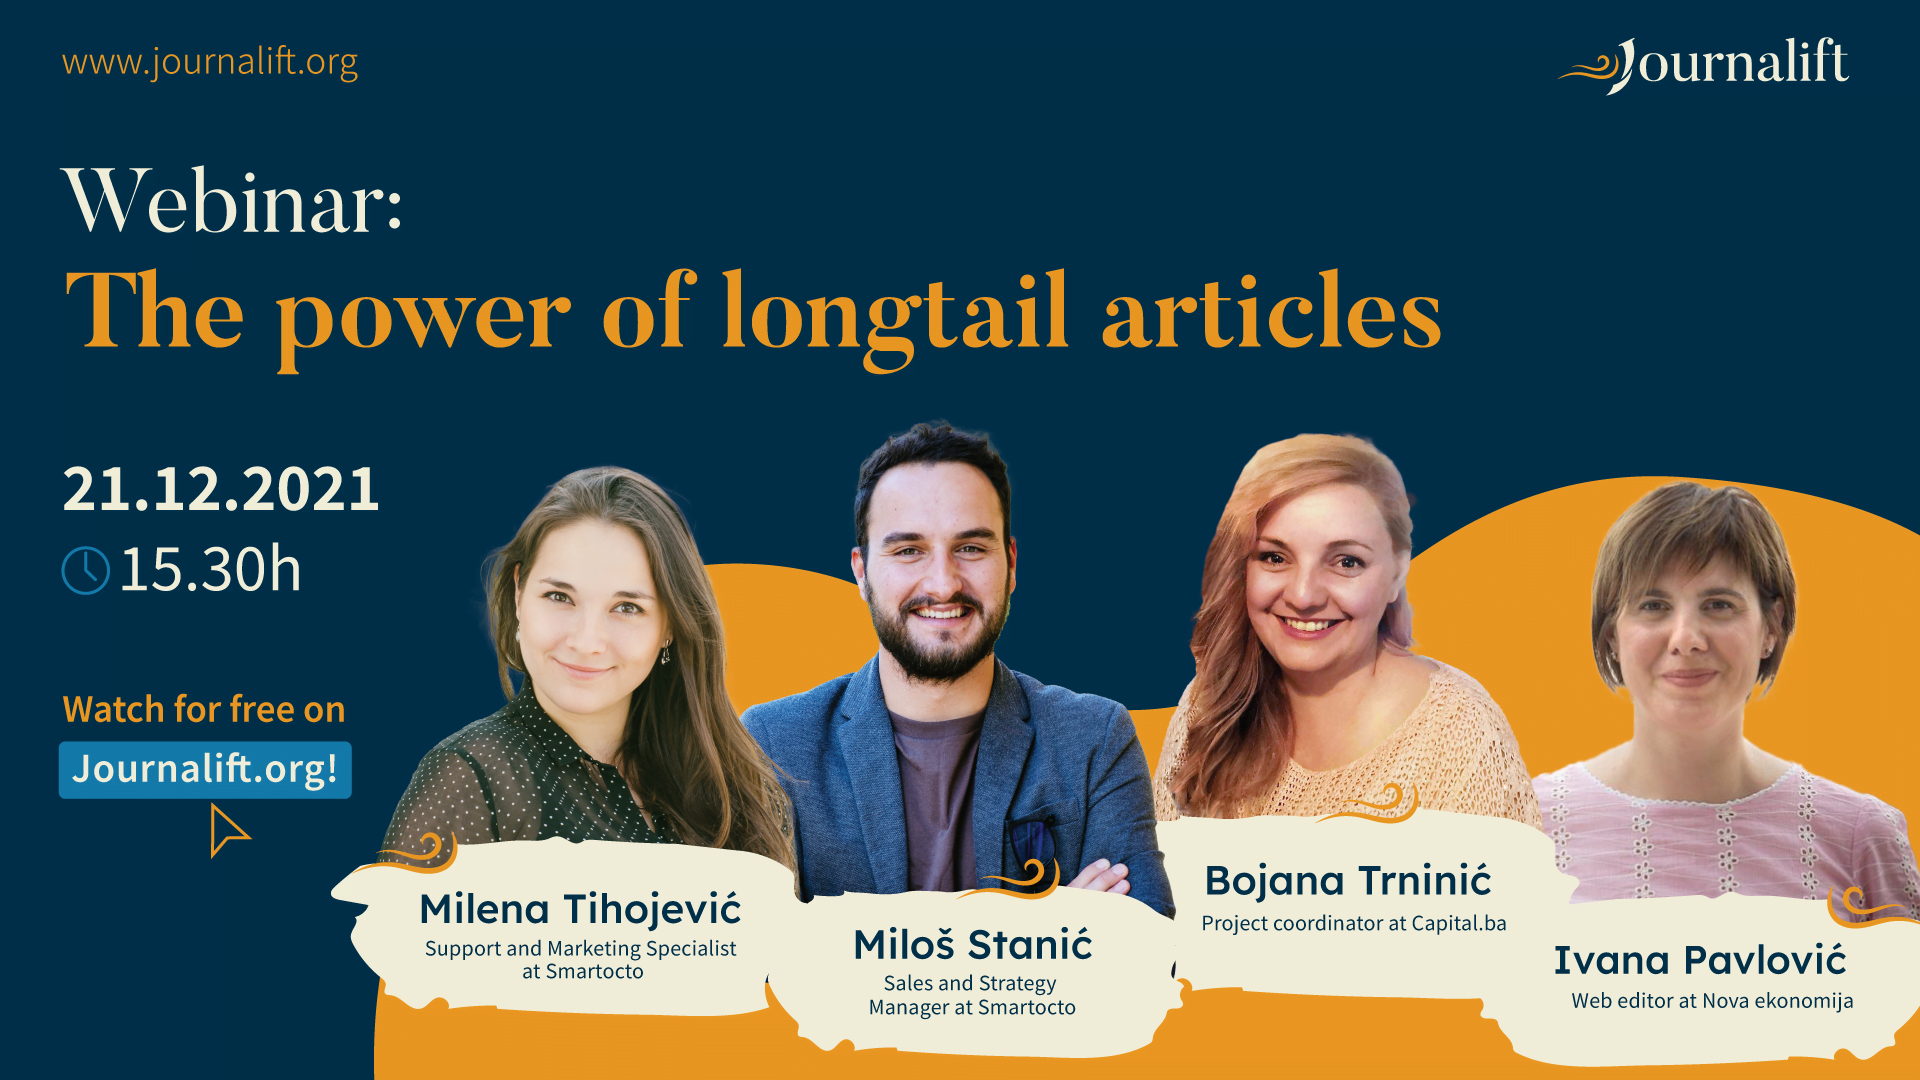 1920x1080px - Webinar- The power of longtail articles